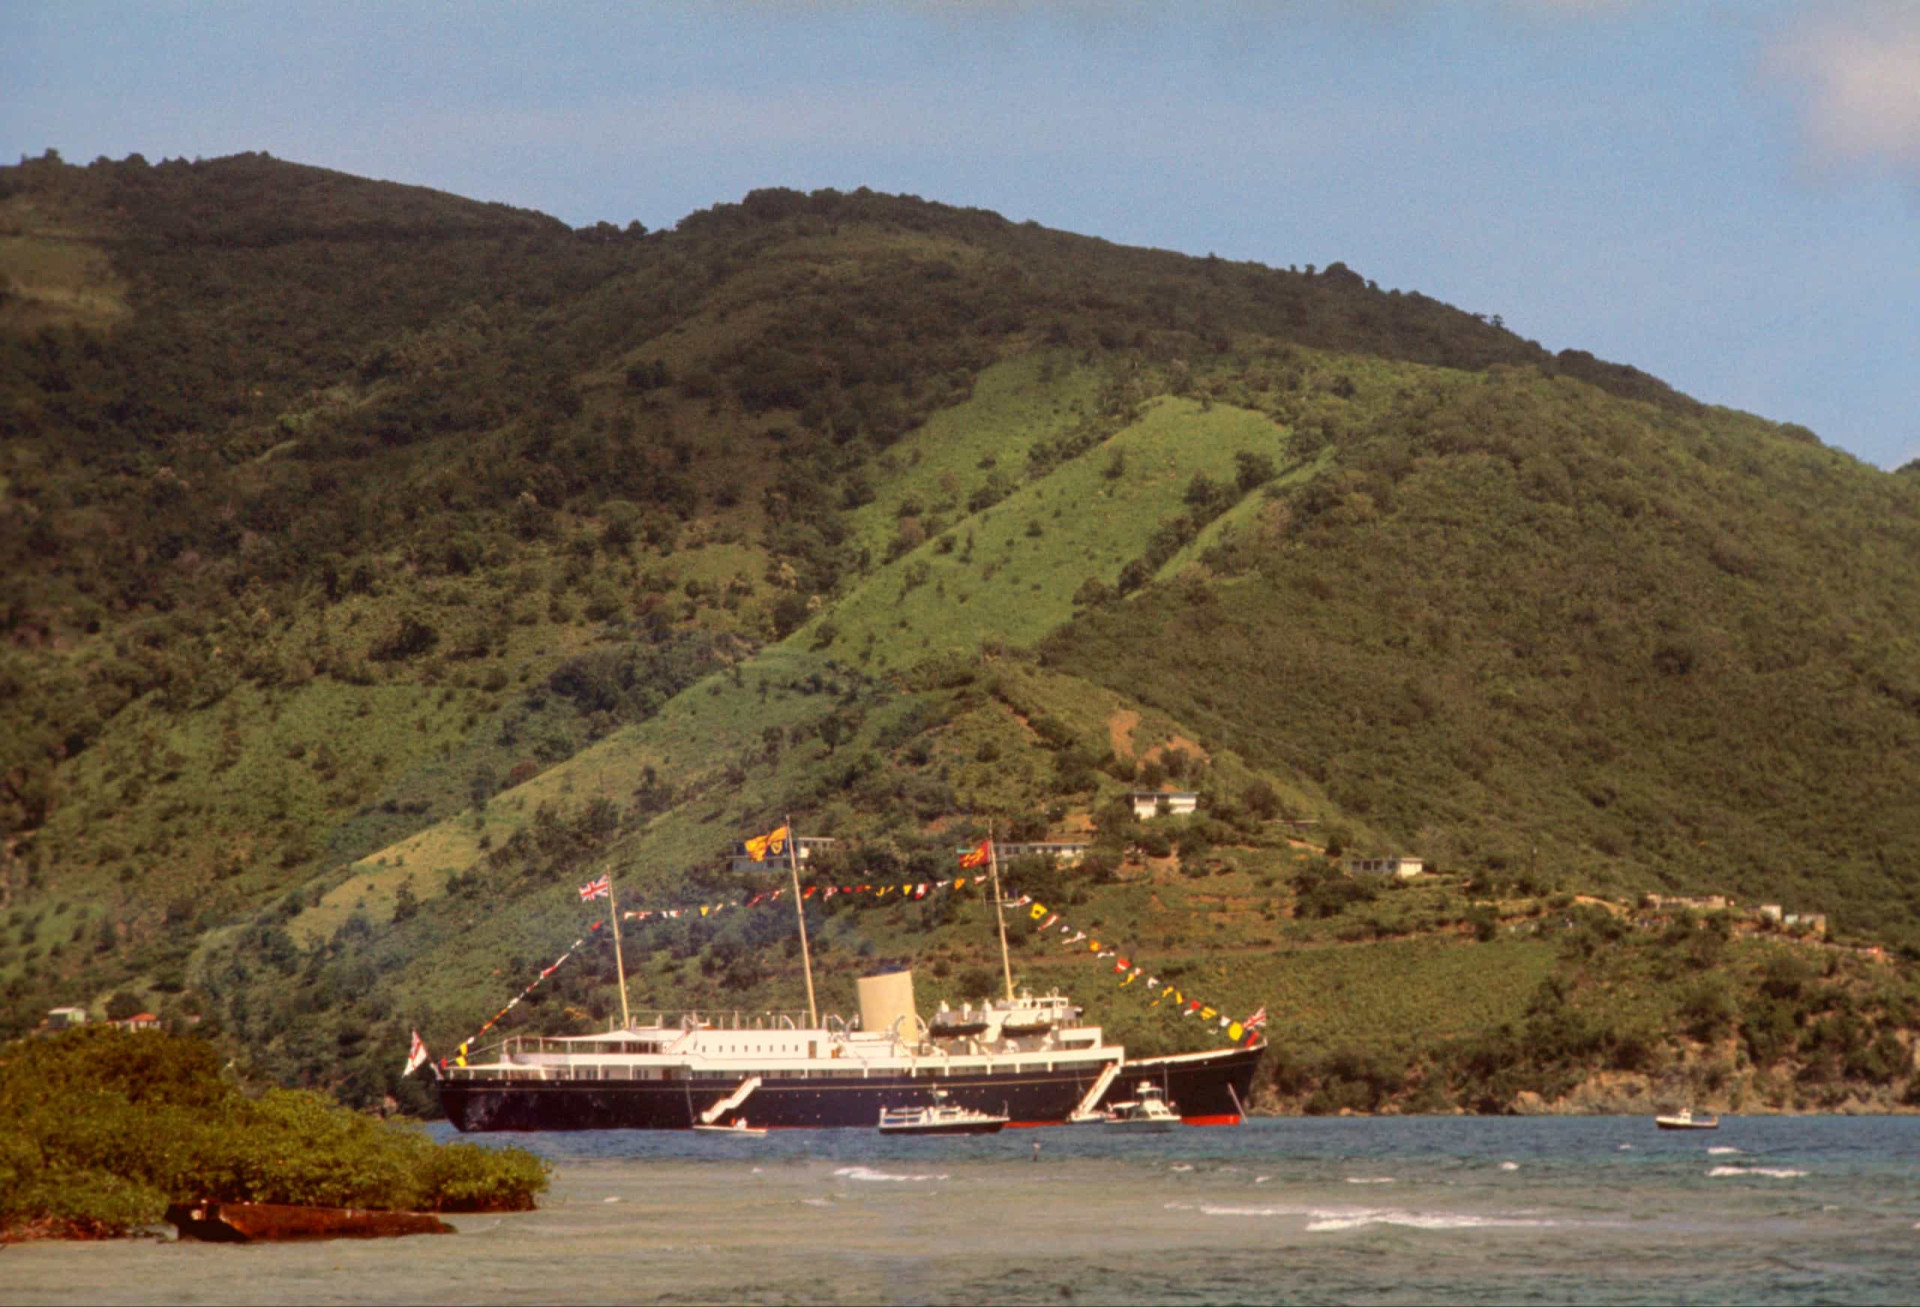 <p>In October 1977, the Royal Yacht <em>Britannia</em> anchored off Road Harbor during Queen Elizabeth II's visit to the British Virgin Islands as part of her Silver Jubilee tour of the Caribbean.</p><p>You may also like:<a href="https://www.starsinsider.com/n/350323?utm_source=msn.com&utm_medium=display&utm_campaign=referral_description&utm_content=474709v3en-ph"> Celebs reveal the stories behind their stage names</a></p>